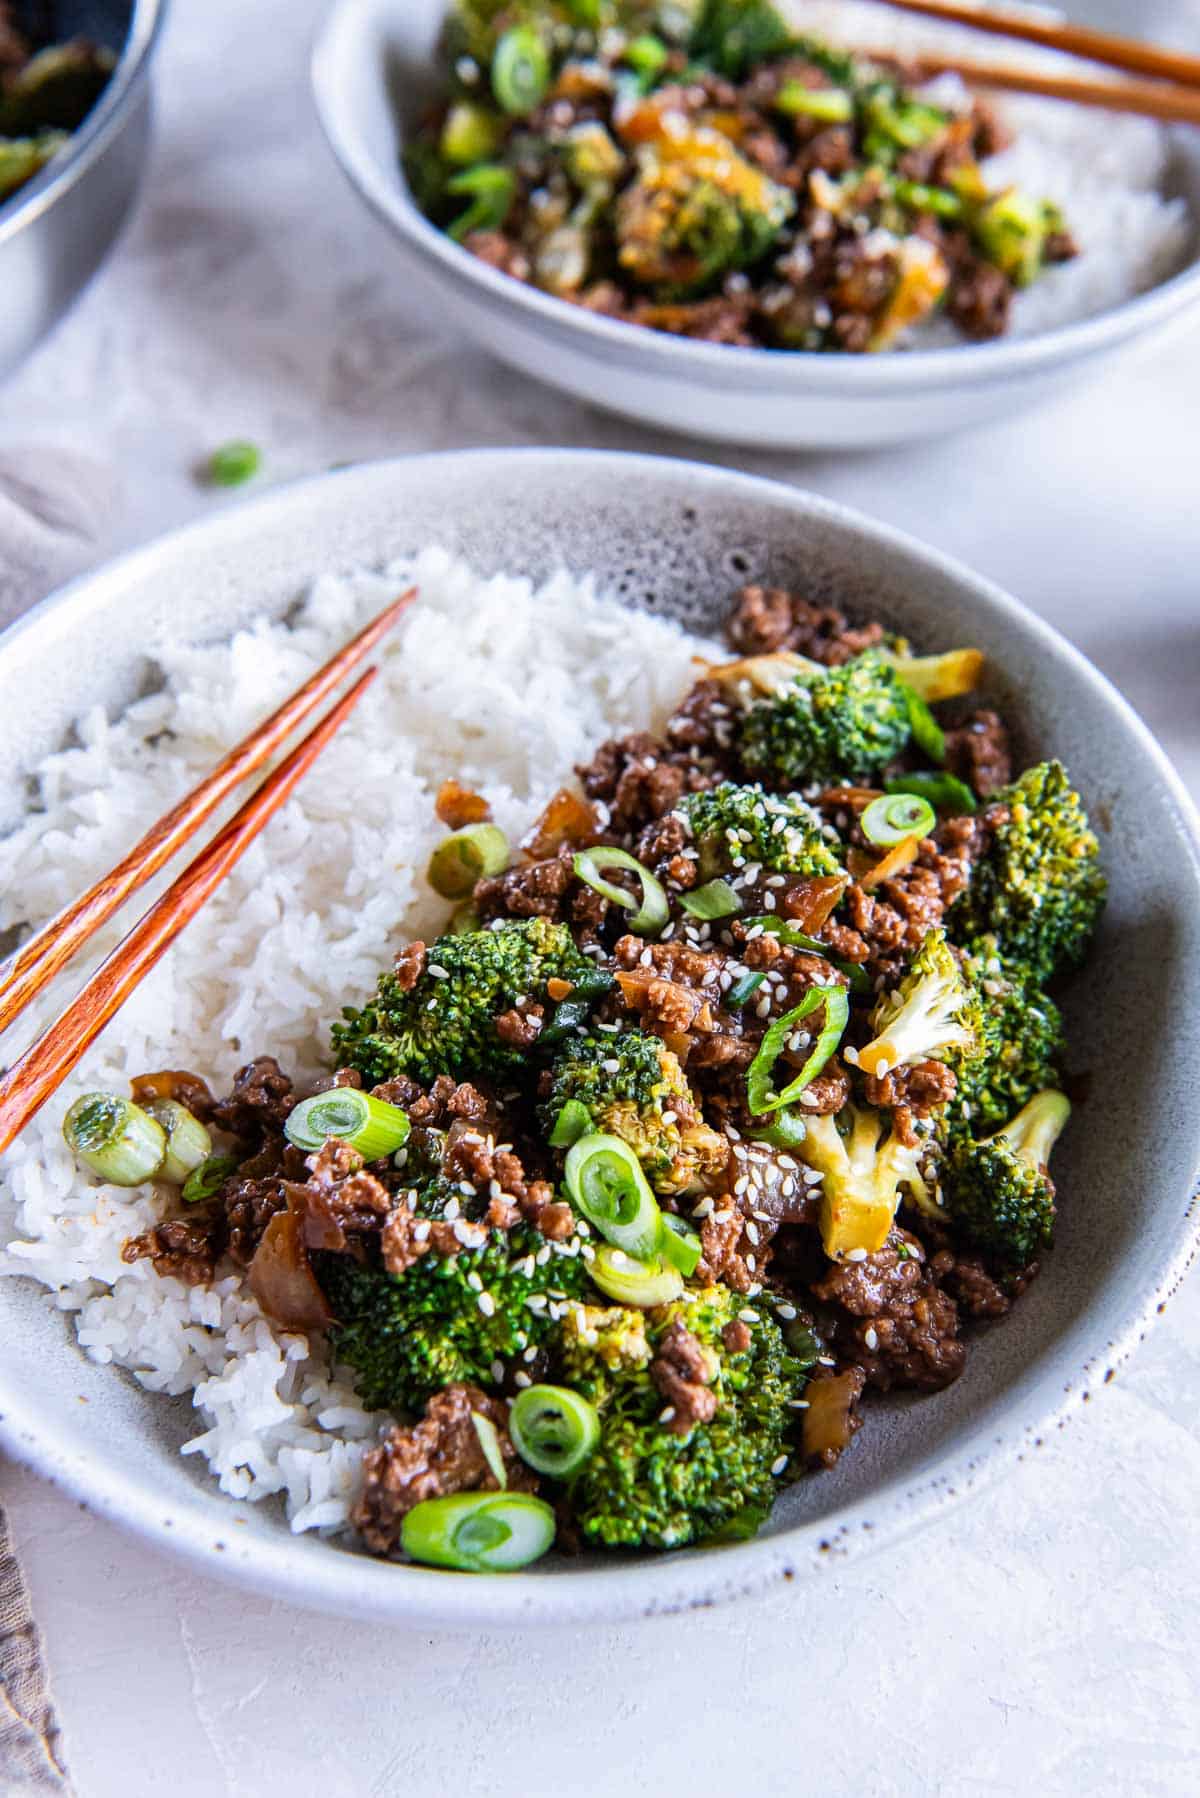 Chopsticks resting in a bowl with Asian ground beef and broccoli and white rice.